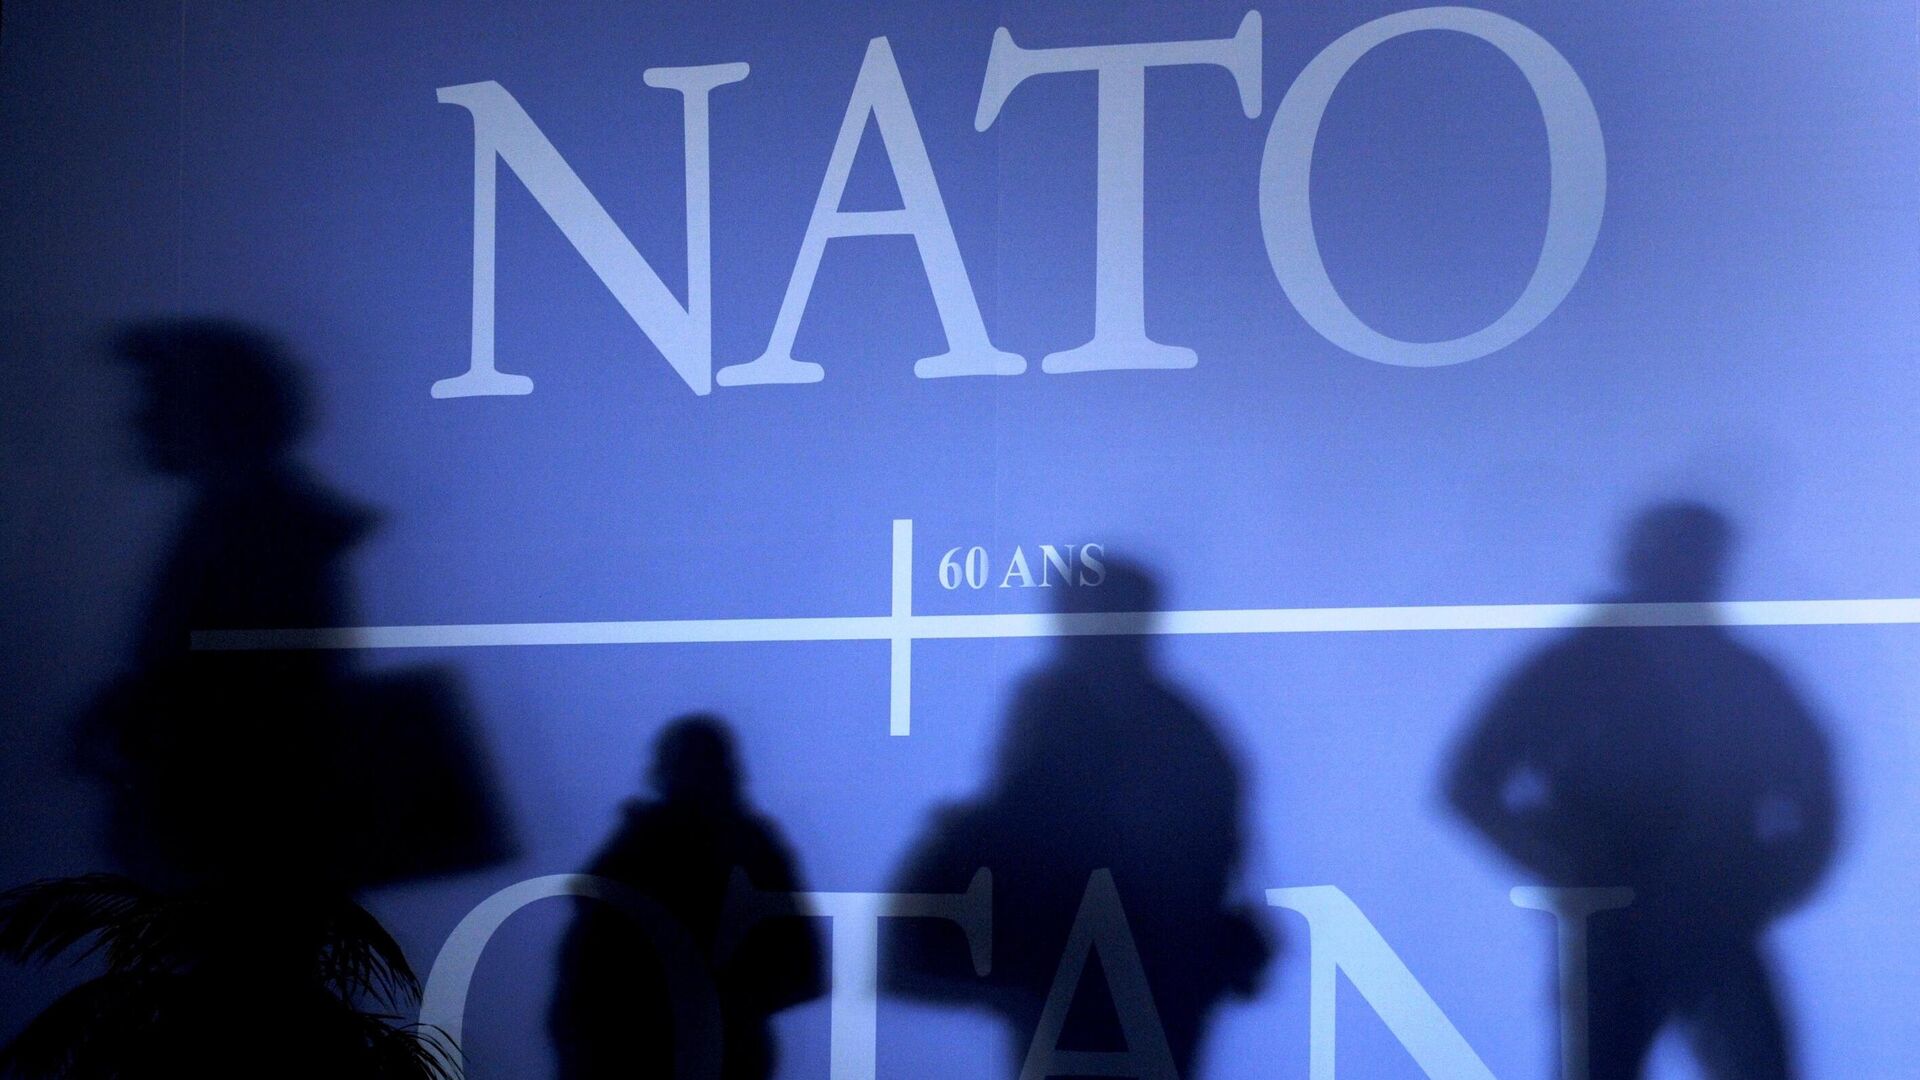 This April 2, 2009 file photo shows shadows cast on a wall decorated with the NATO logo and flags of NATO countries in Strasbourg, eastern France, before the start of the NATO summit which marked the organisation's 60th anniversary.  - Sputnik International, 1920, 28.03.2023